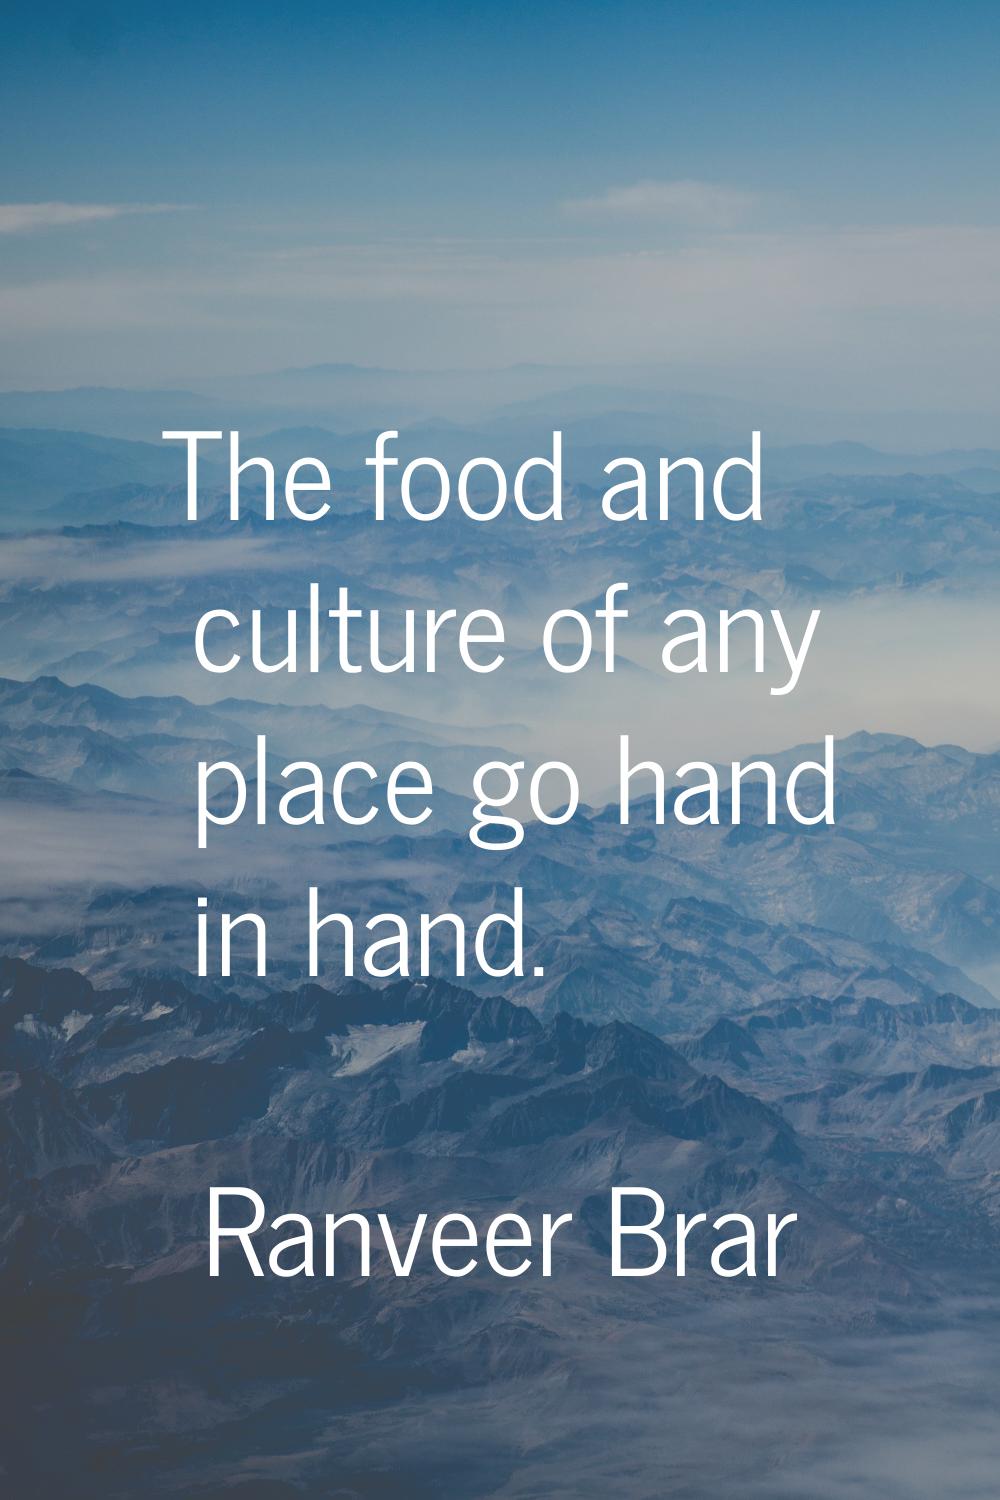 The food and culture of any place go hand in hand.